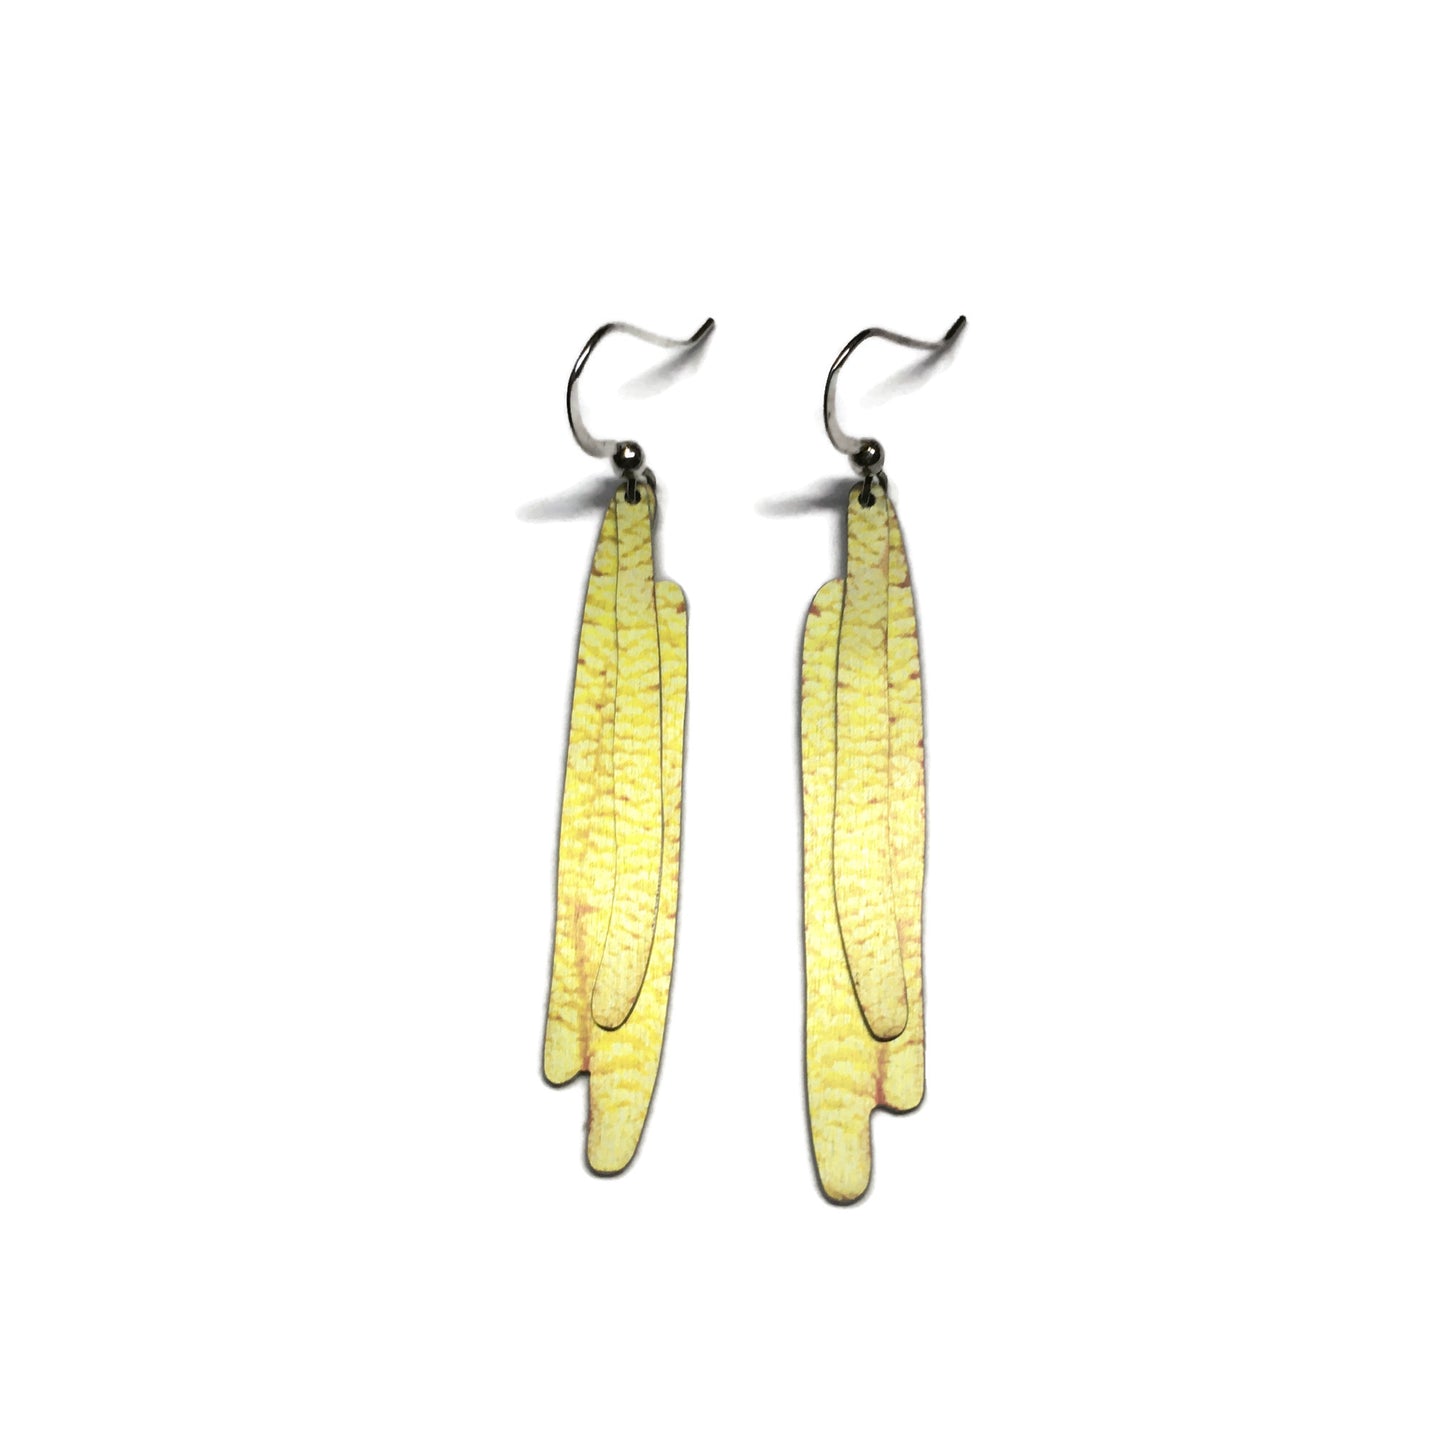 Lambs tail catkin earrings by Photofinish Jewellery